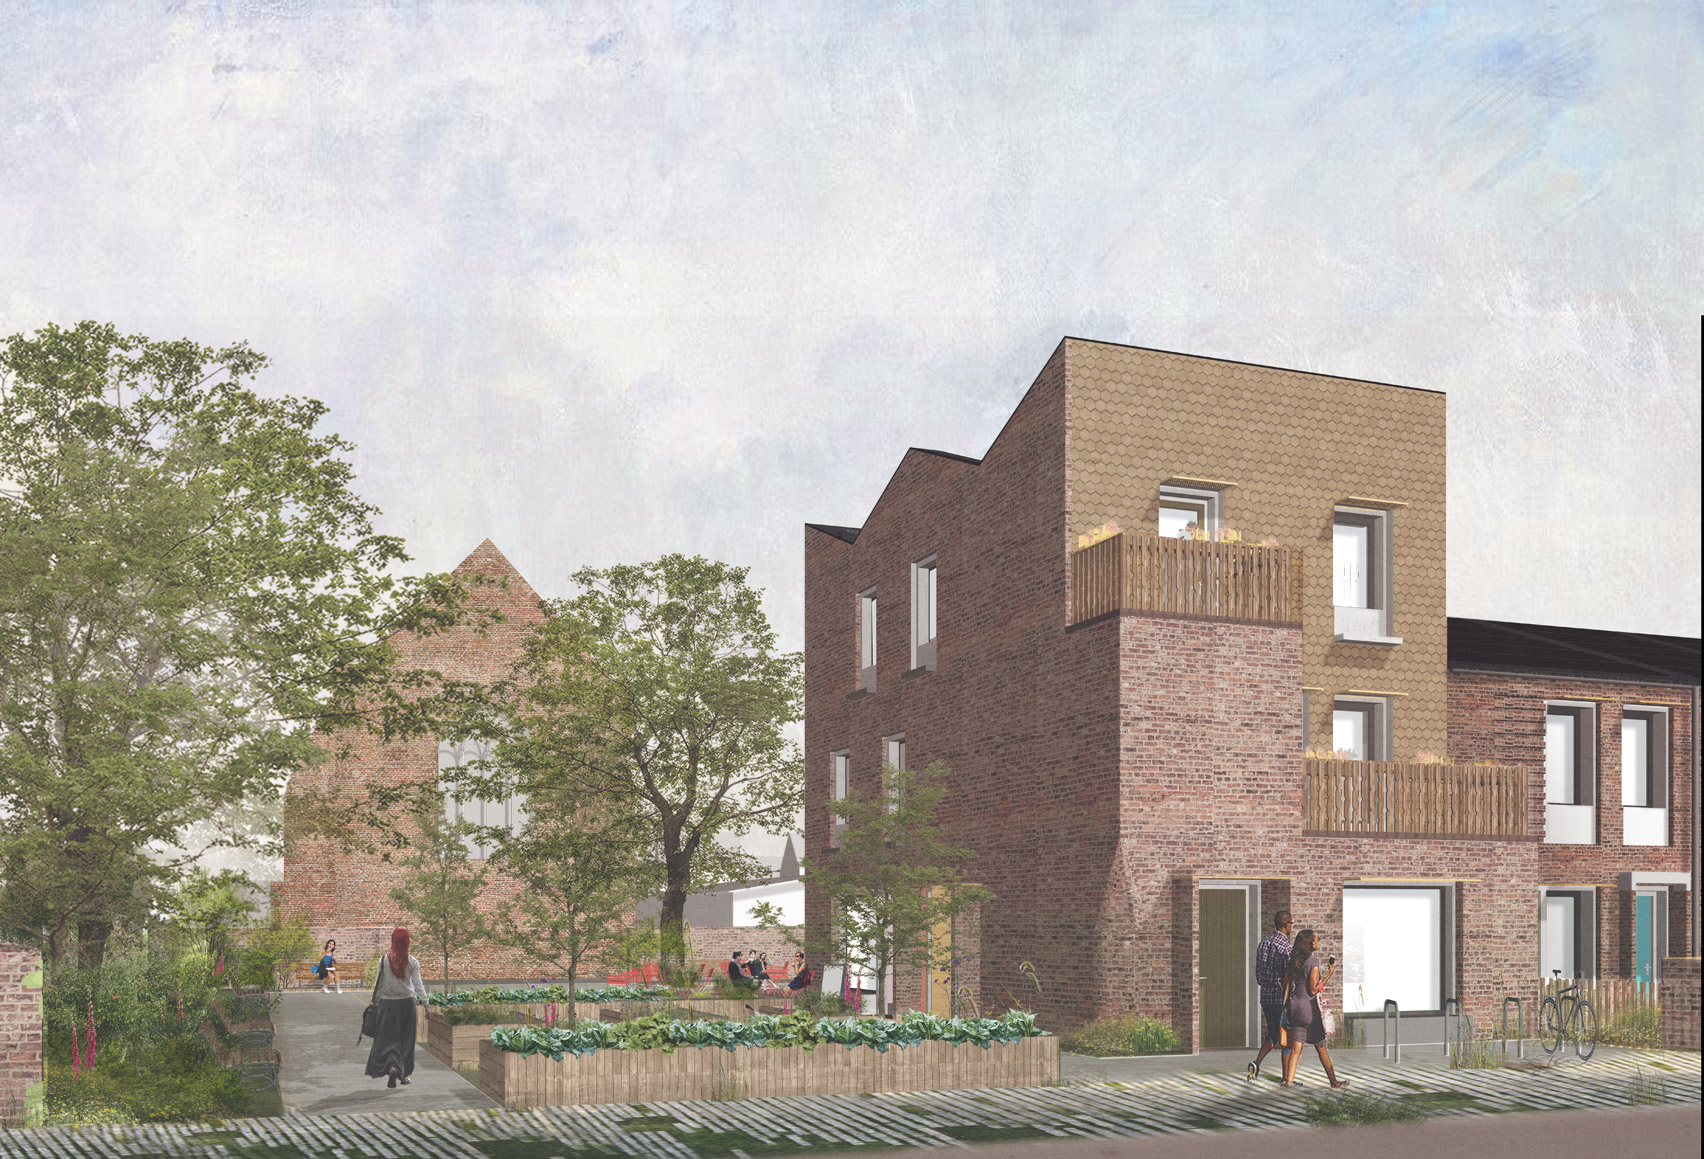 Exterior visual of a site from Mikhail Riches Housing Delivery Programme for the City of York